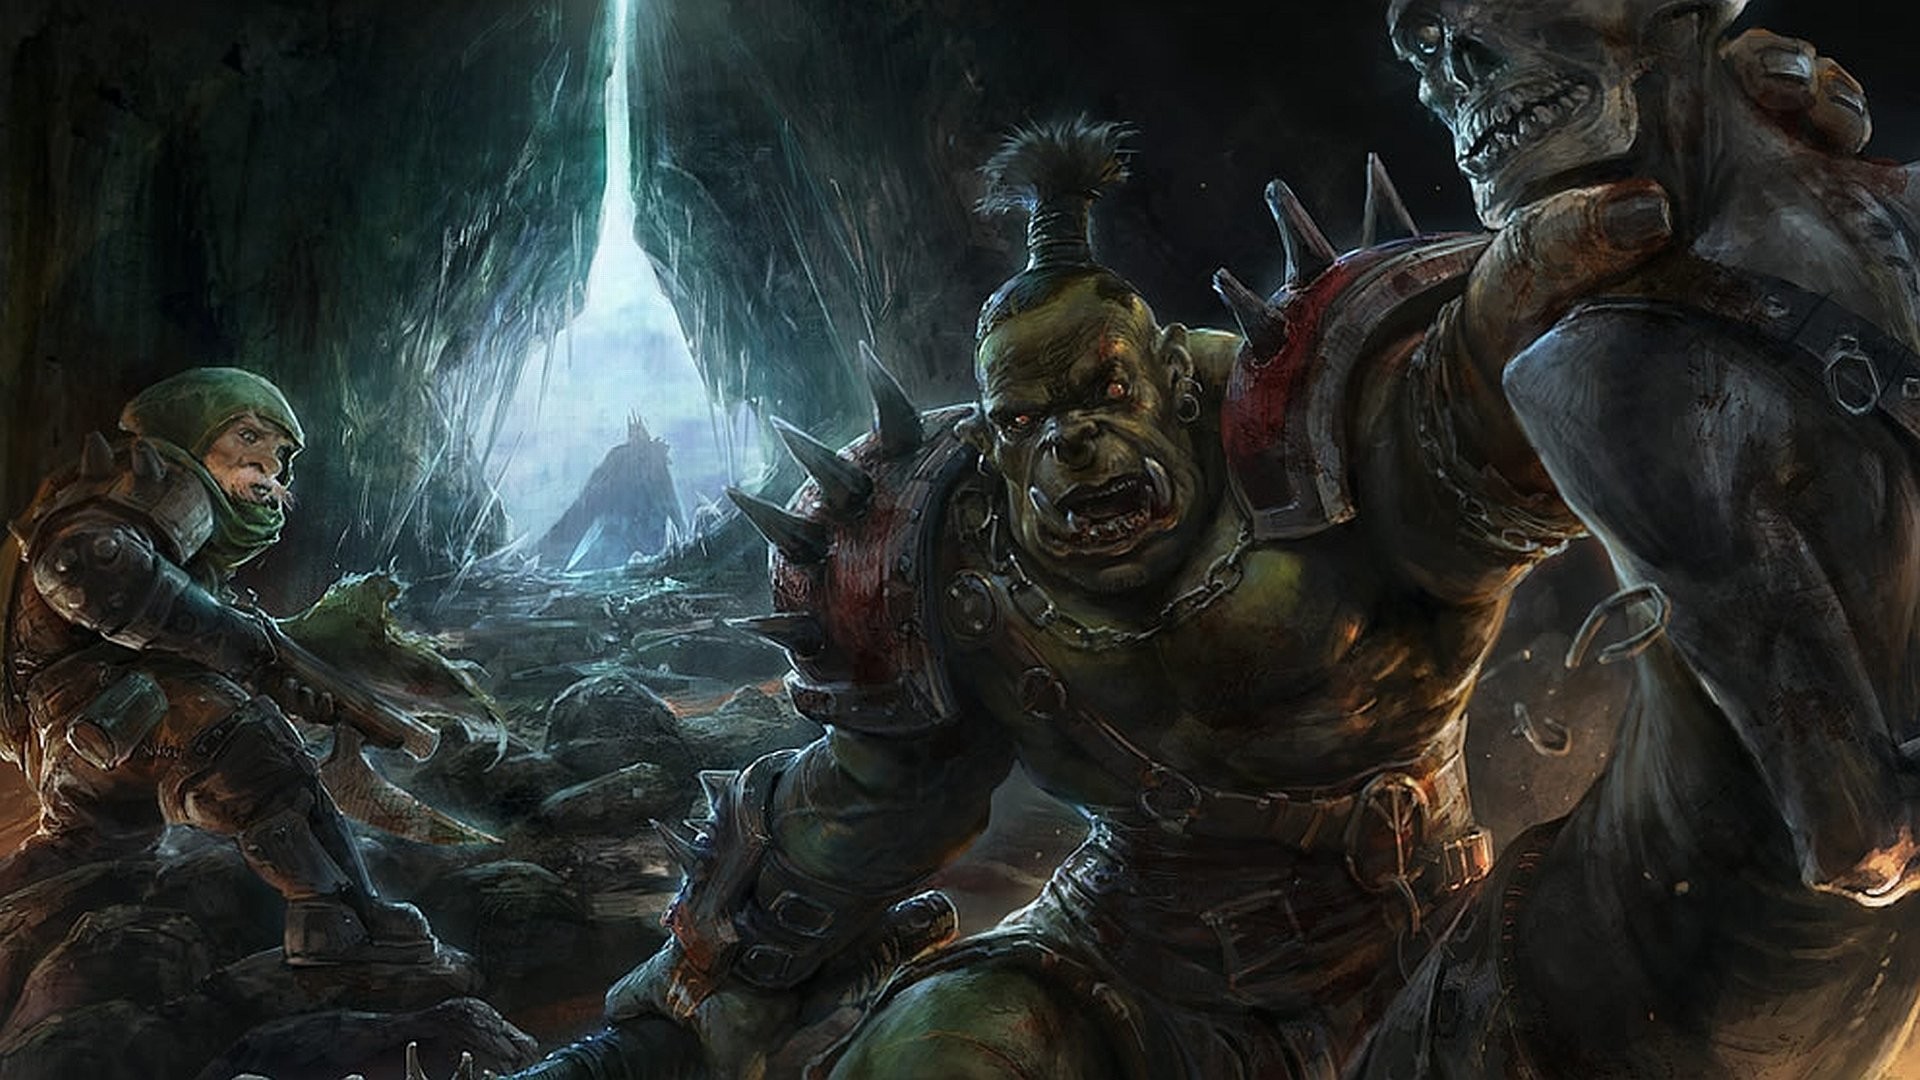 1920x1080, Wallpapers Id - World Of Warcraft Orc Art - HD Wallpaper 